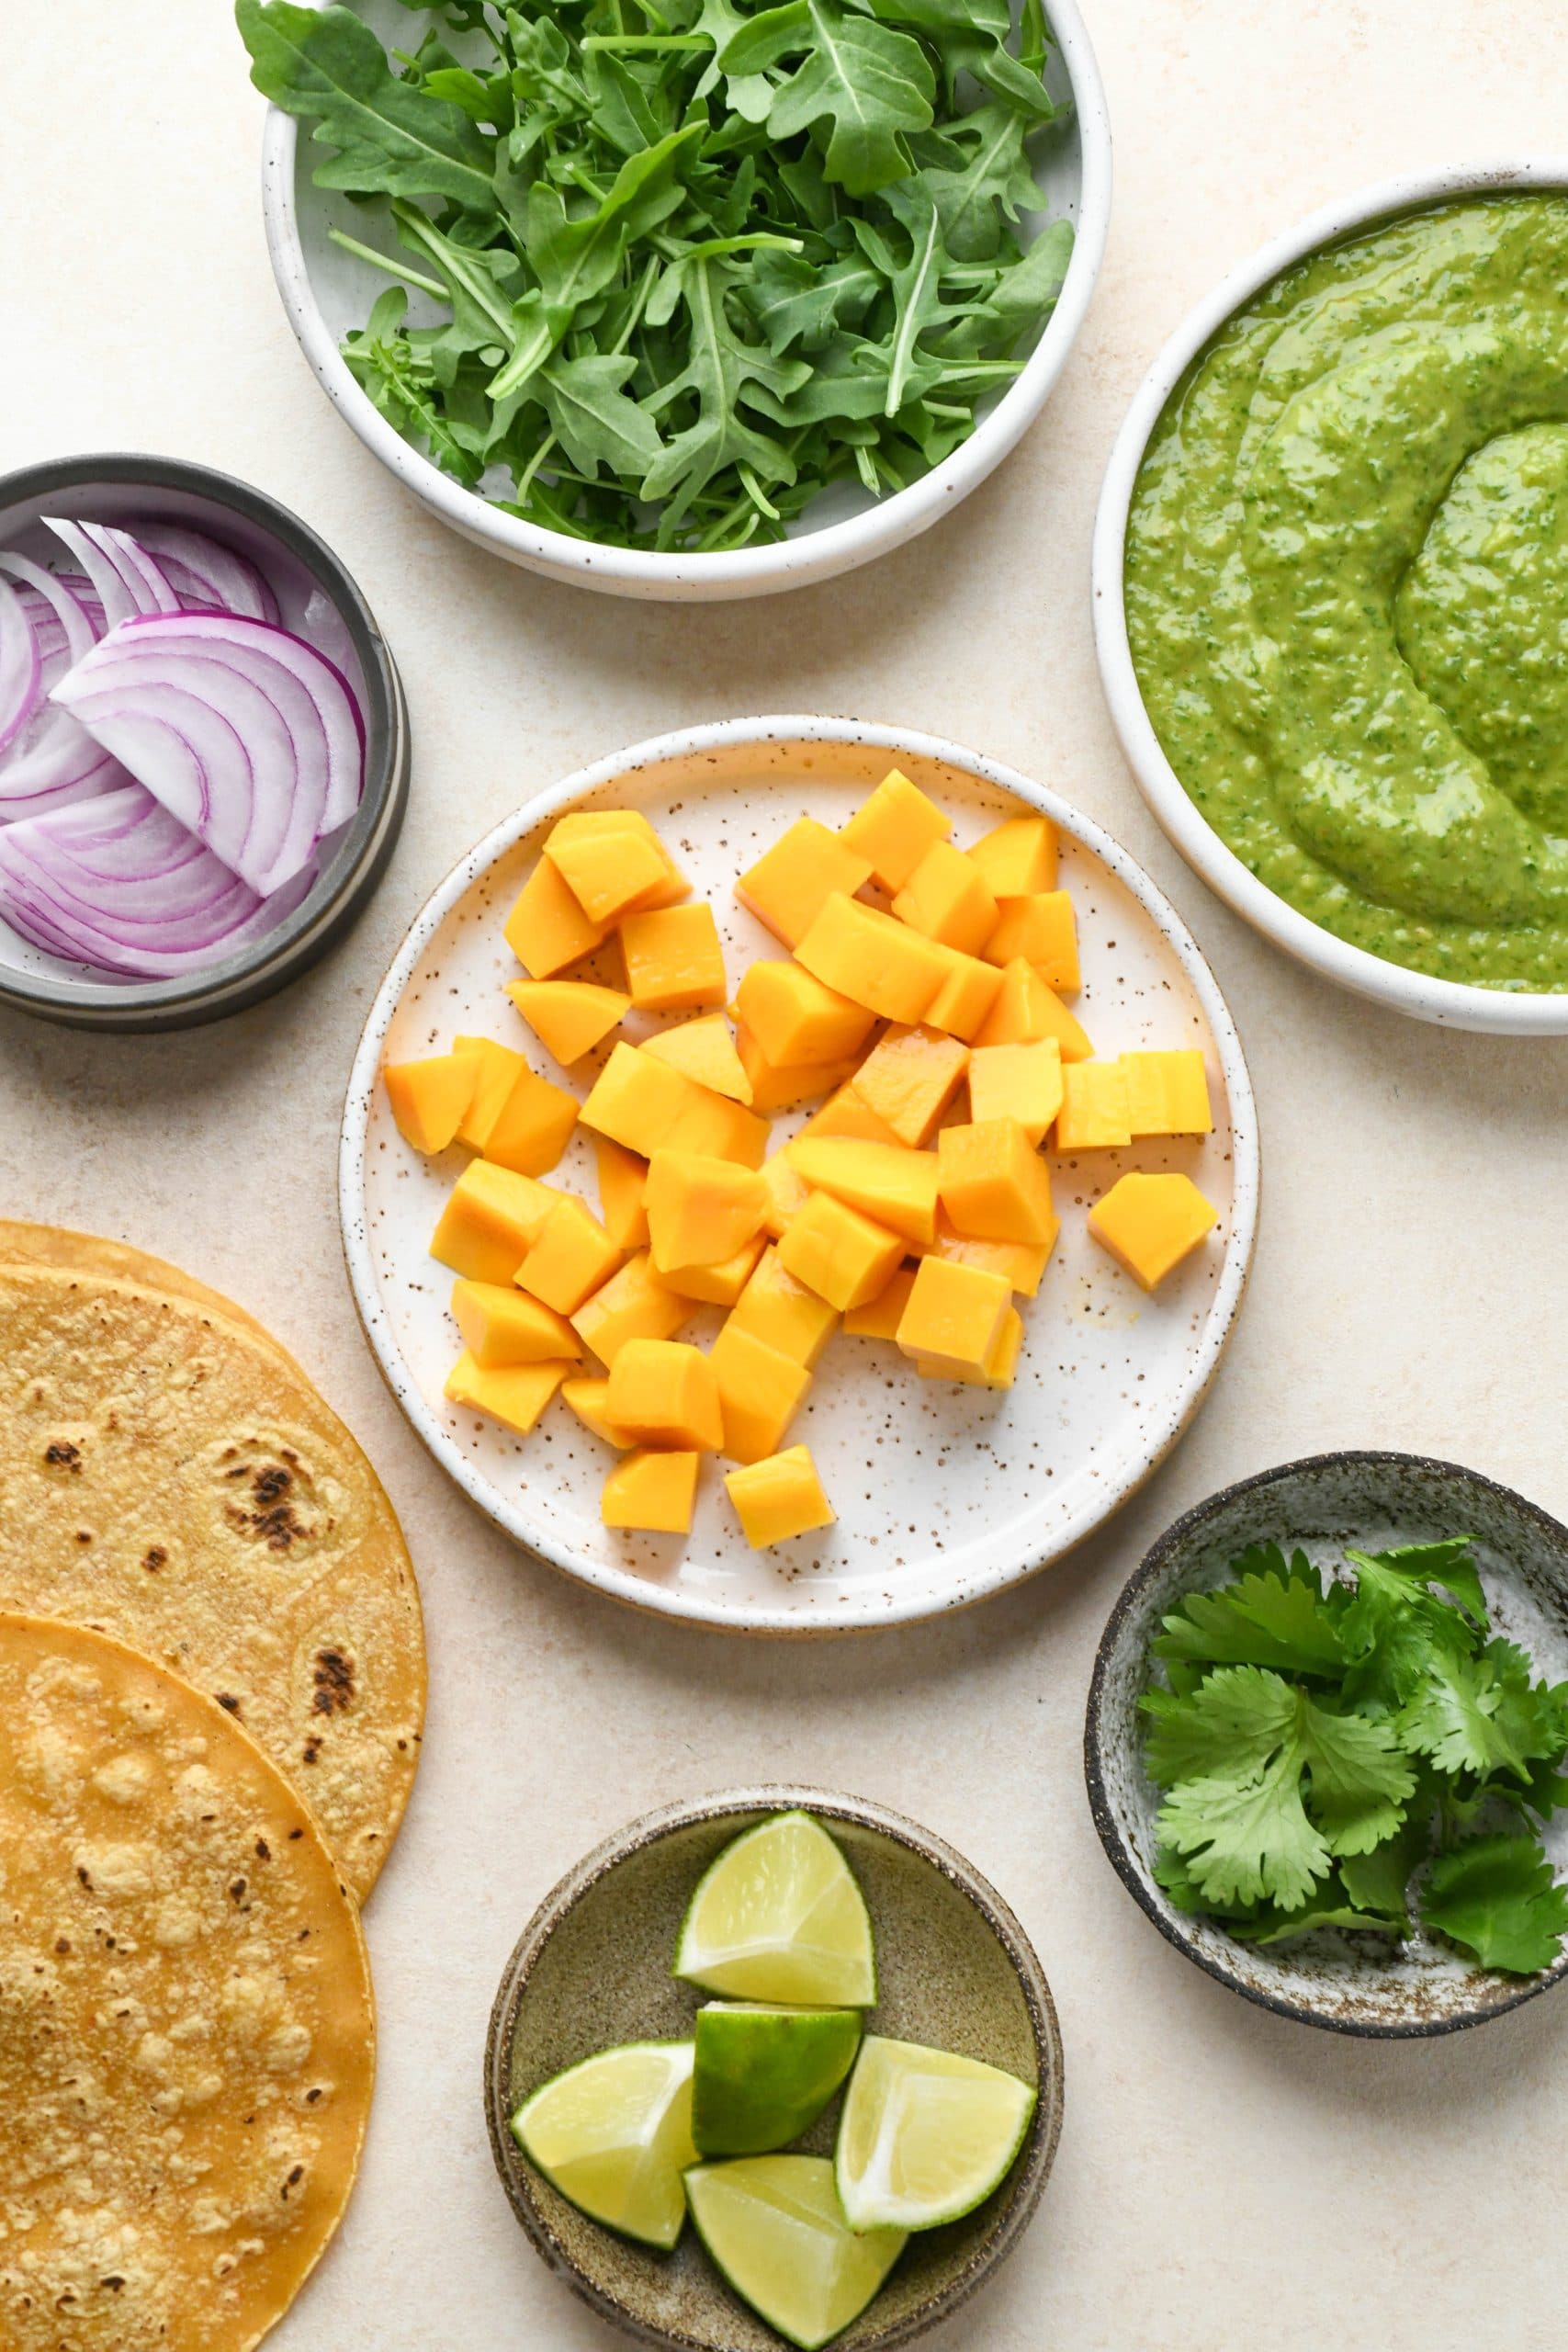 Ingredients to assemble blackened salmon tacos - fresh mango, arugula, red onion, cilantro, lime, green sauce, and tortillas.